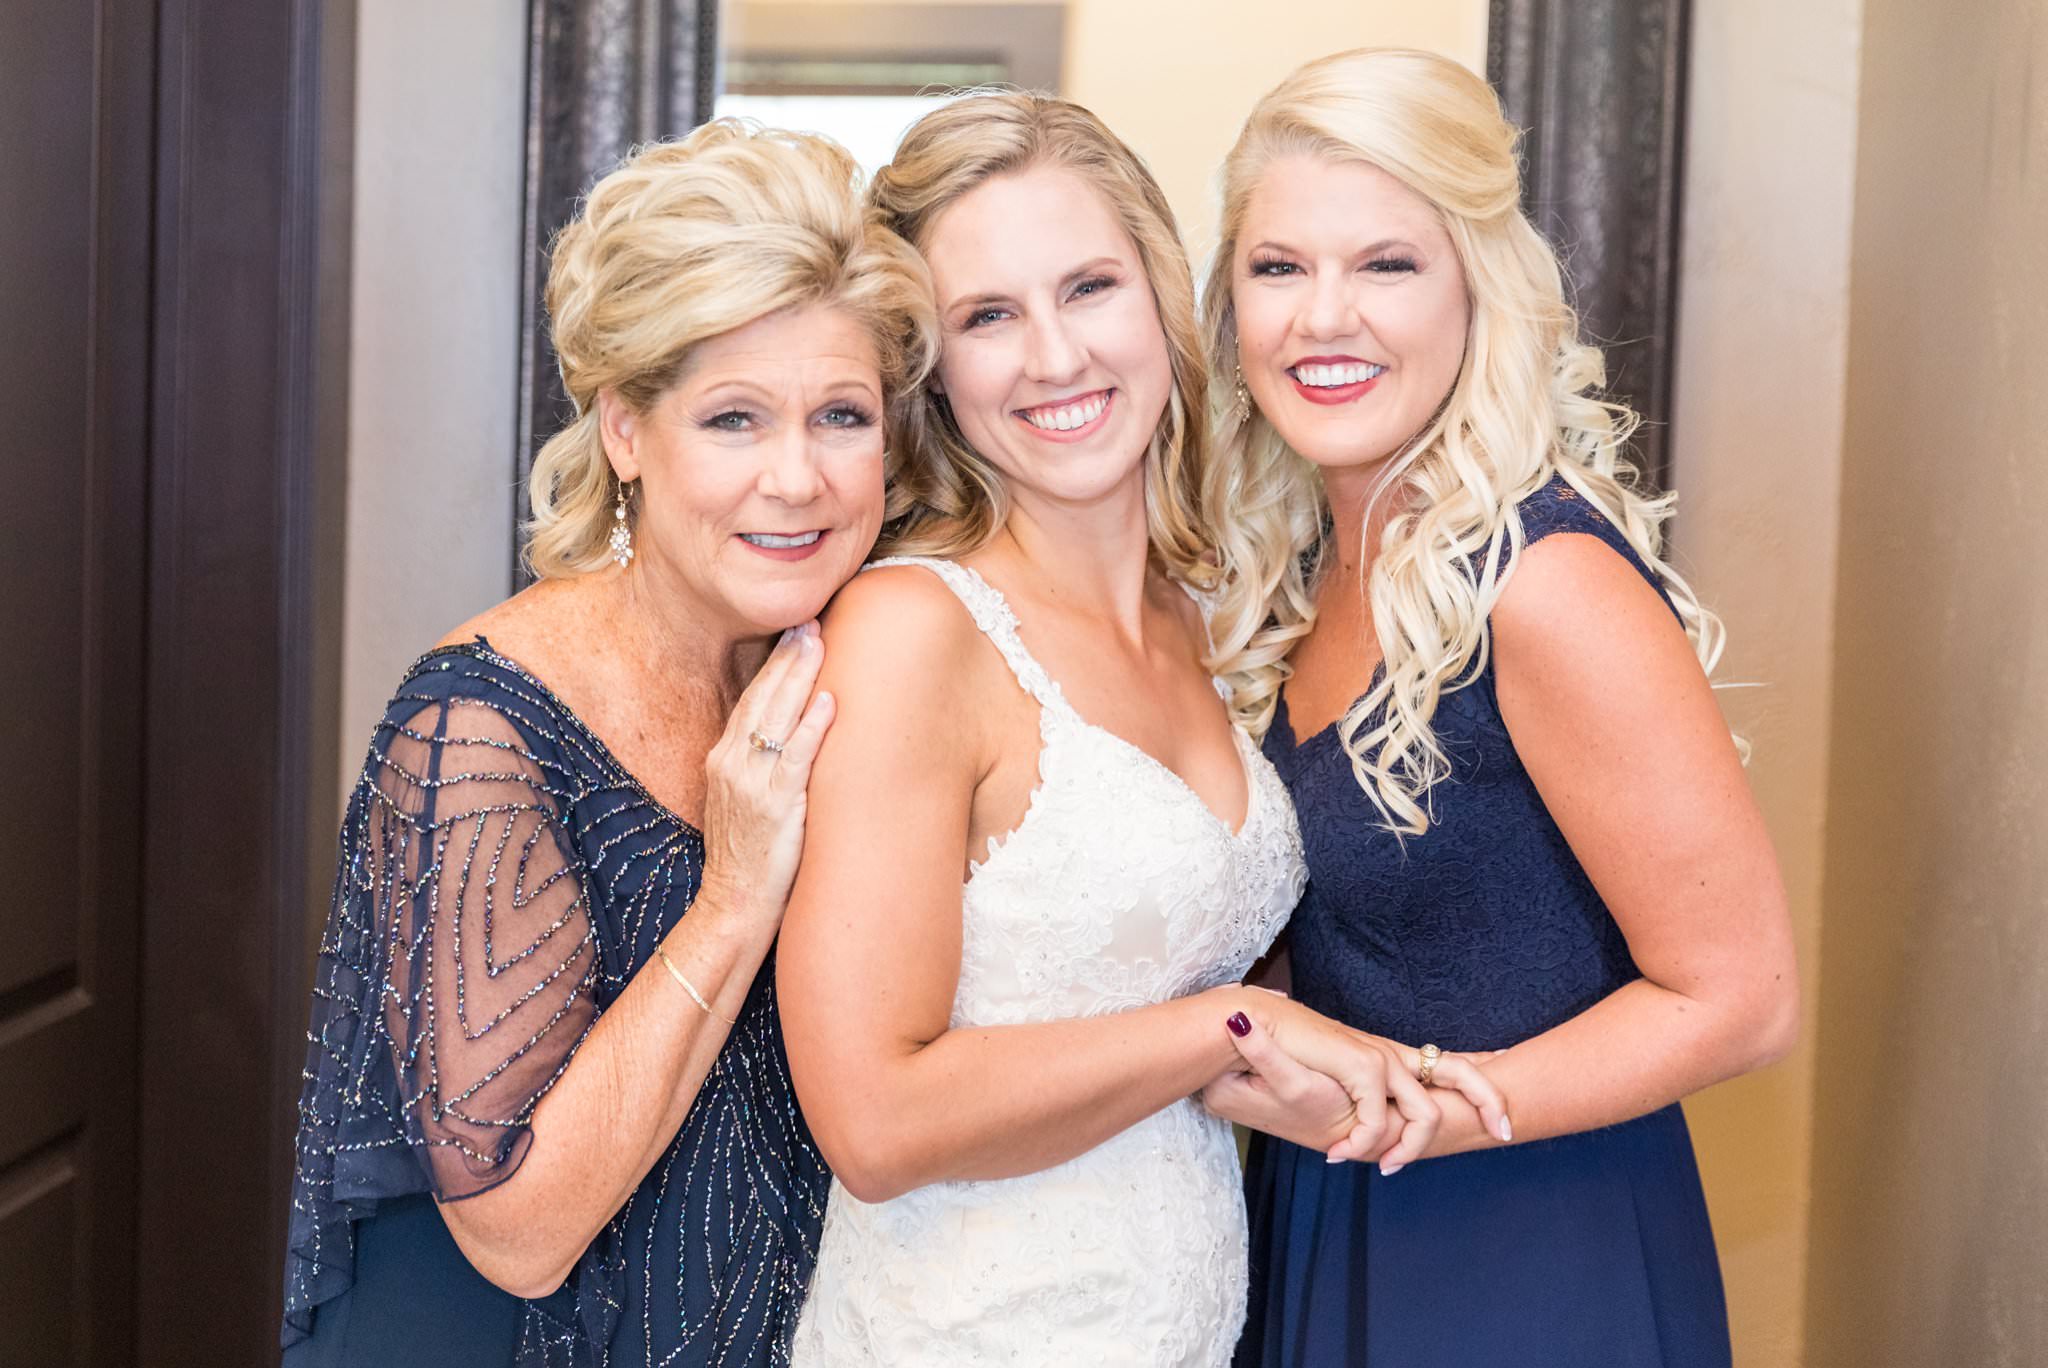 A Grey and Navy Wedding at the Lodge at Country Inn Cottages in Fredericksburg, TX by Dawn Elizabeth Studios, Fredericksburg Wedding Photographer